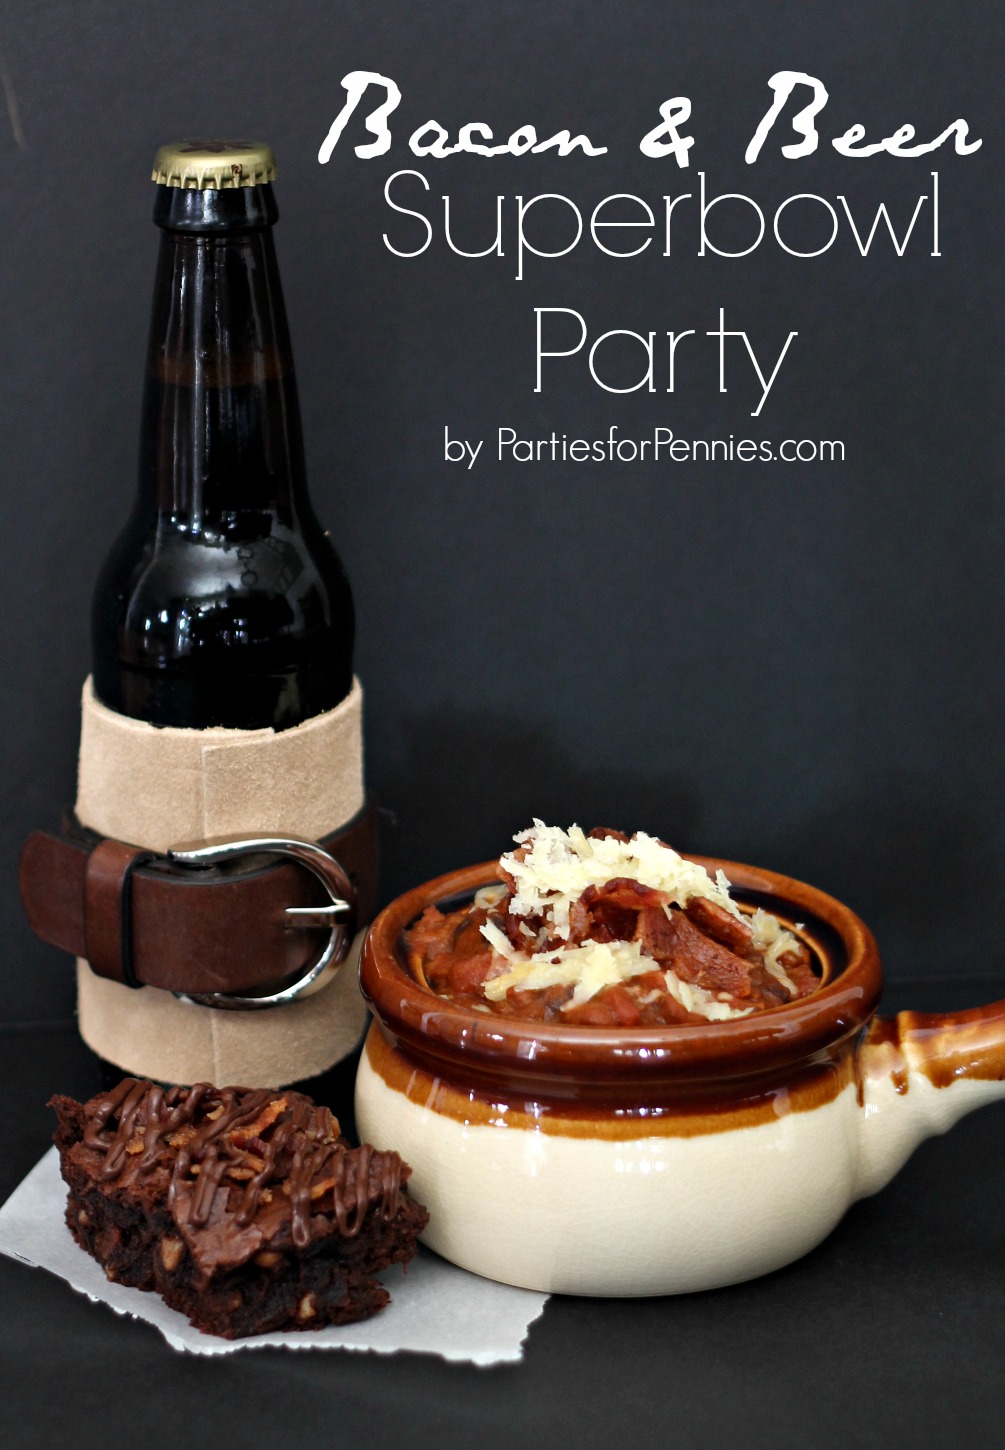 Bacon & Beer Superbowl Party by PartiesforPennies.com